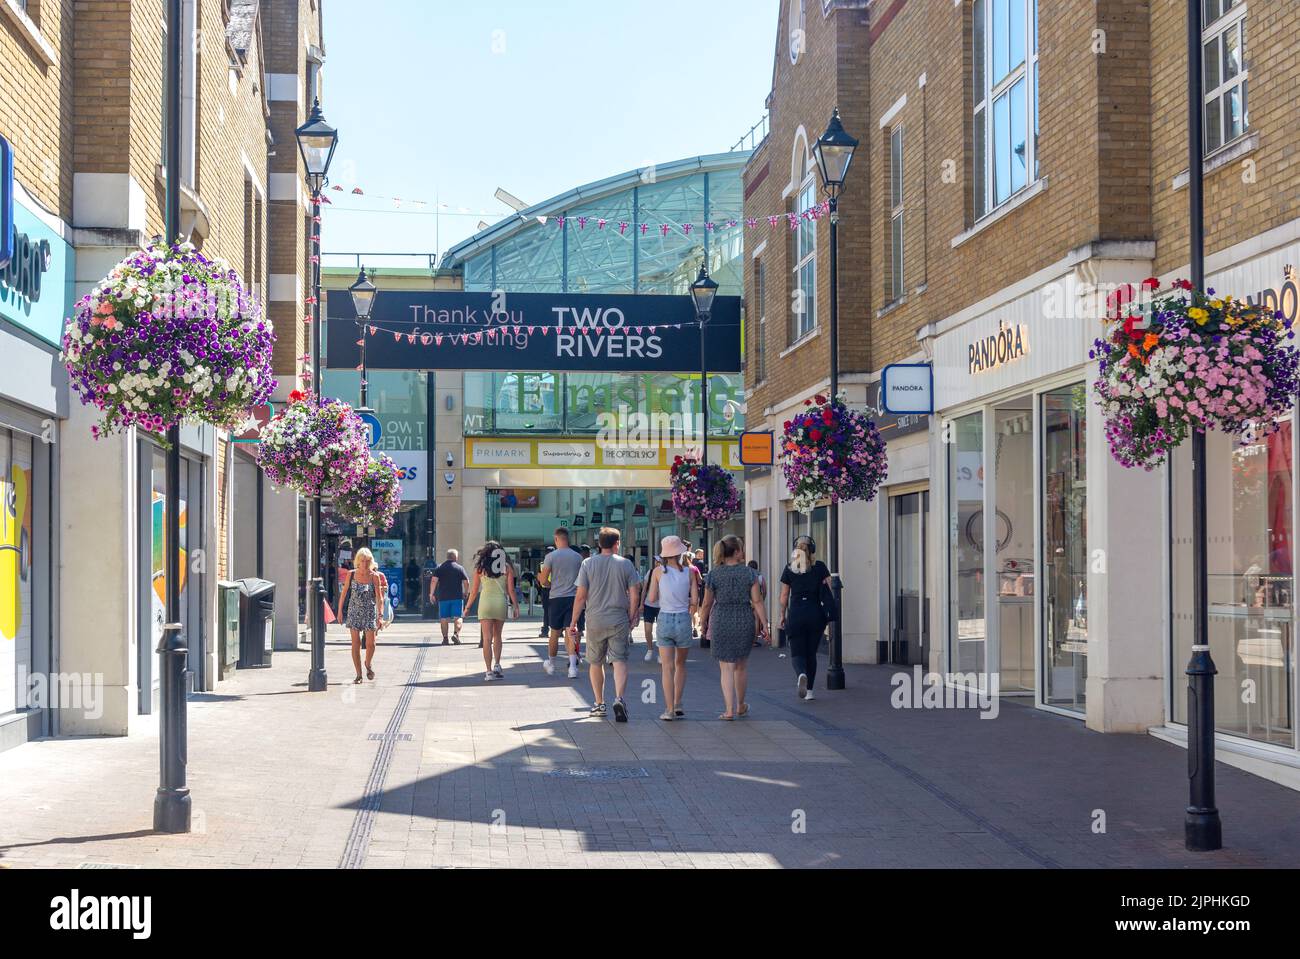 Church Street, Two Rivers Shopping Centre, Staines-upon-Thames, Surrey, Inglaterra, Reino Unido Foto de stock